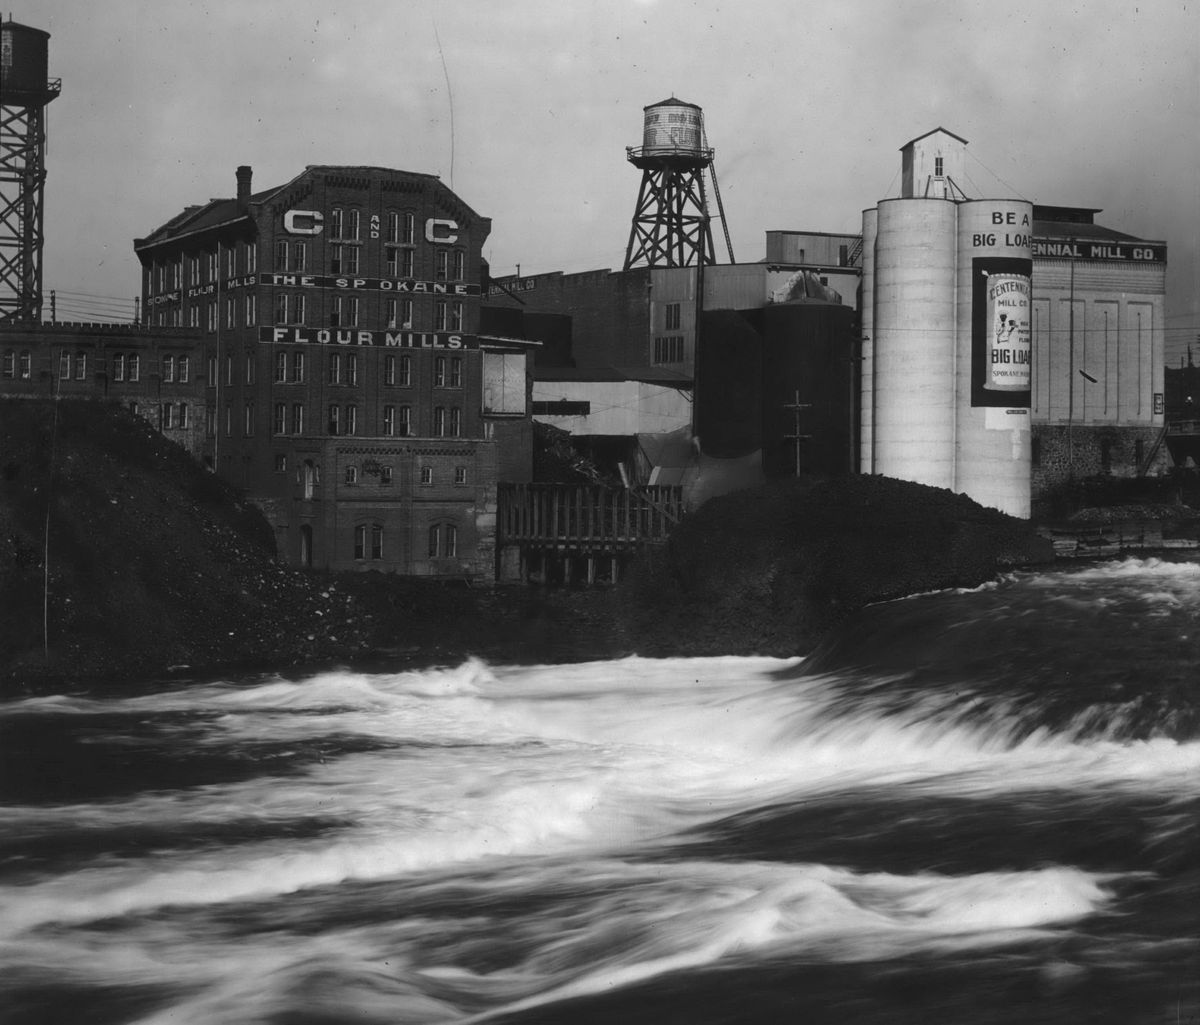 Circa 1910: Spokane Flour Mill, left, and Centennial Mill once sat side-by-side on the north shore of the Spokane River through the 1890s. The Spokane Flour Mill closed in 1972 and was converted to a multiuse building in 1973. Centennial Mill was torn down in 1963 and operations moved to a location on East Trent Avenue, which was built around 1940.  (Frank Palmer/The Spokesman-Review Photo Archive)